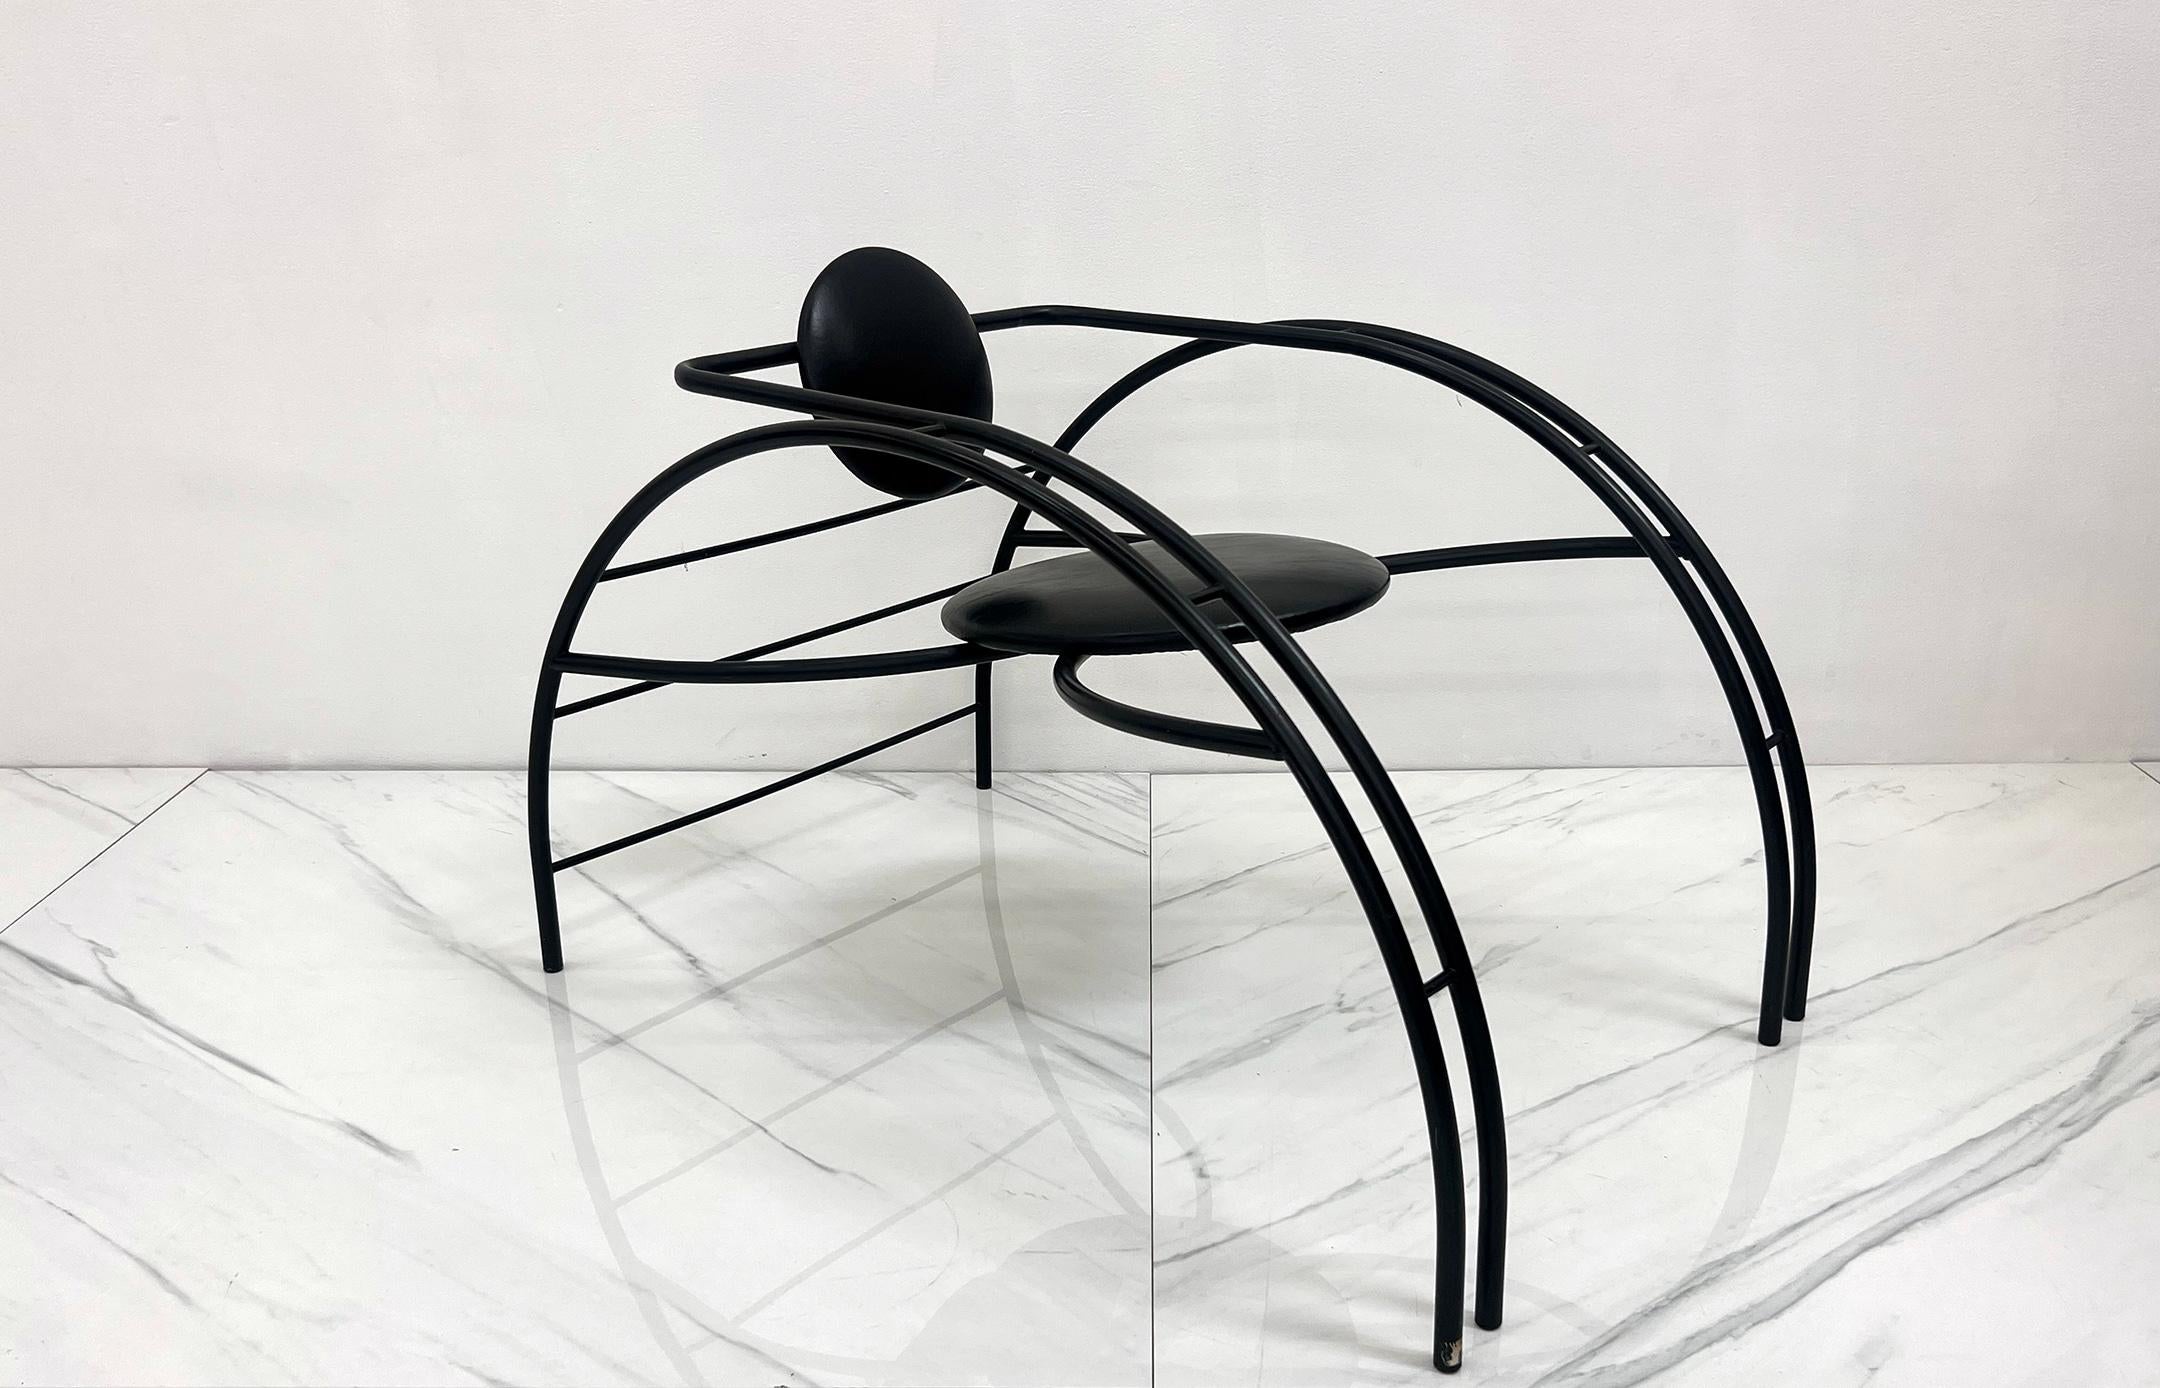 An absolutely stunning Quebec 69 spider chair by Canadian Postmodern Design Group Les Amisca. This chair was designed in the 1980s and features a rounded steel Art Deco style body with a round seat and seat back that are upholstered in its original